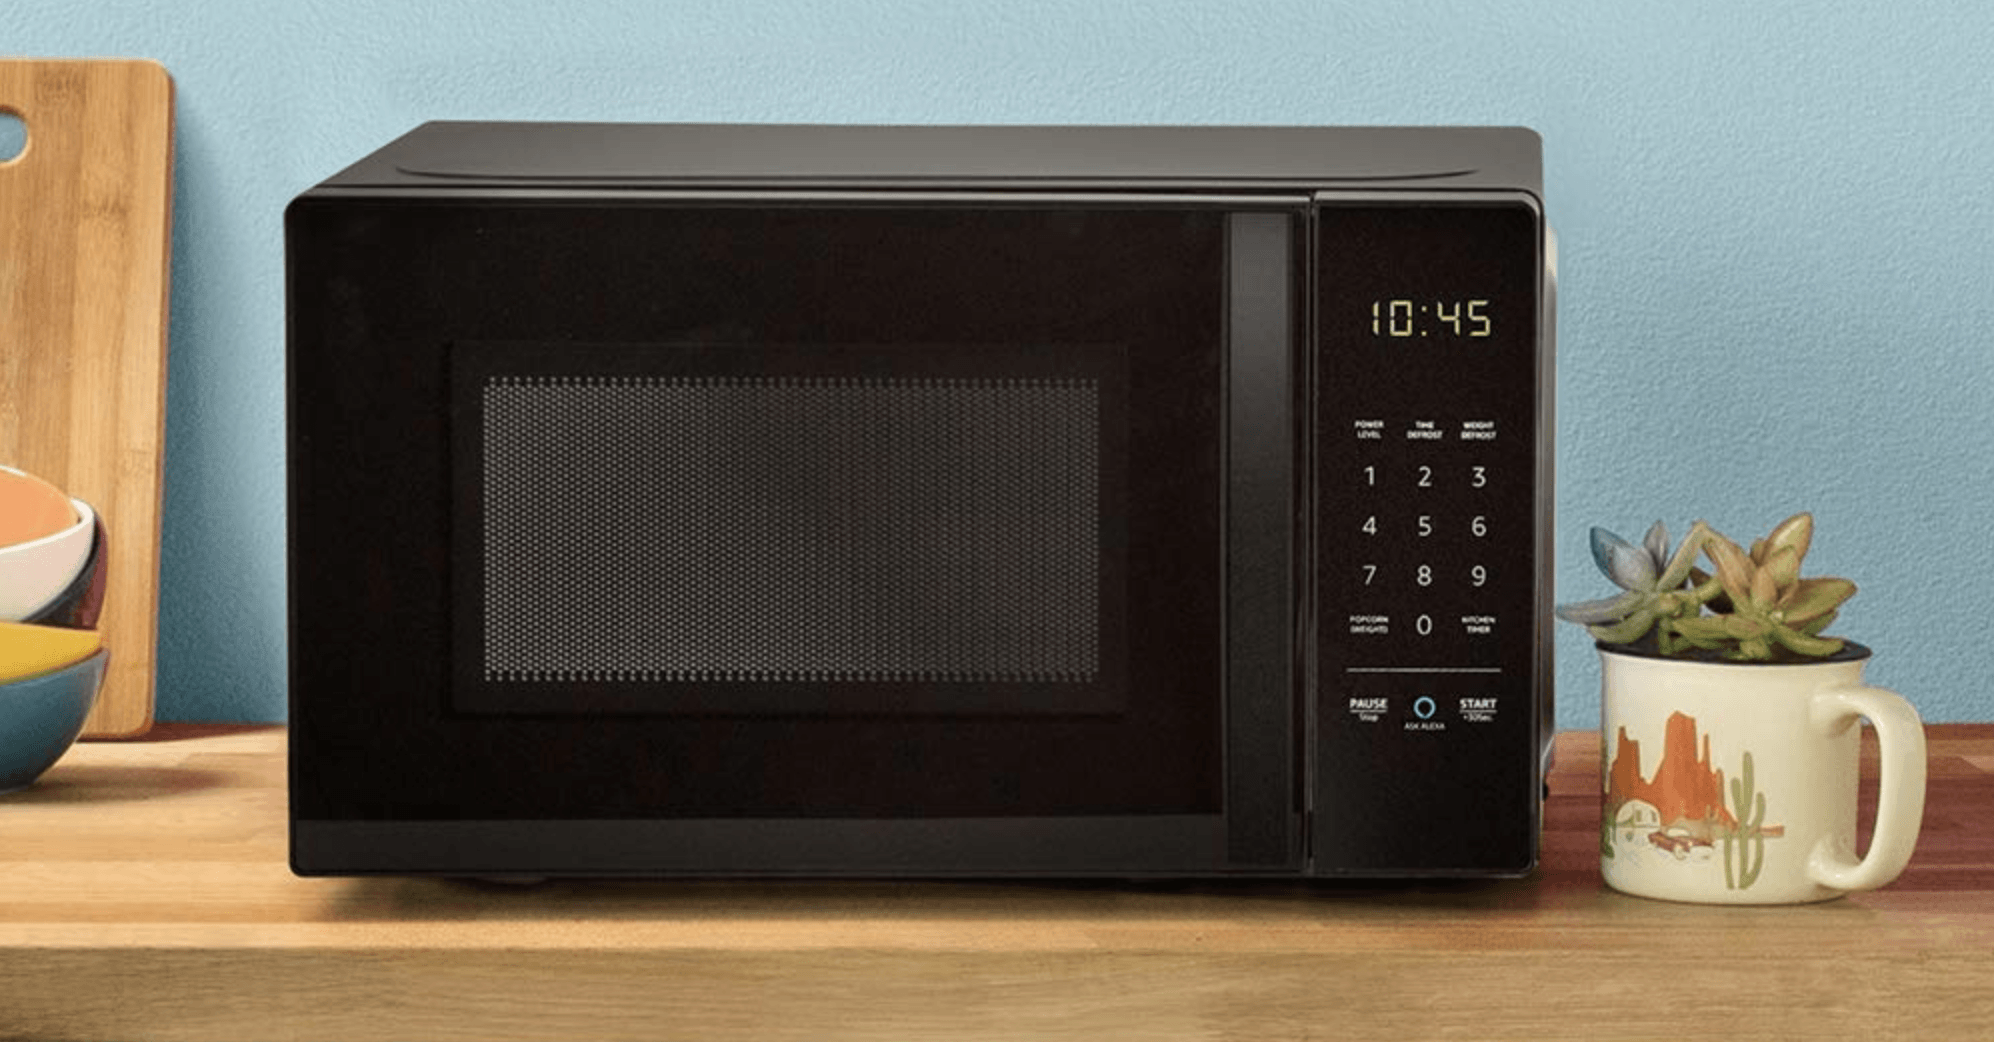 Hot deal: Amazon's Alexa microwave gets its first discount ever